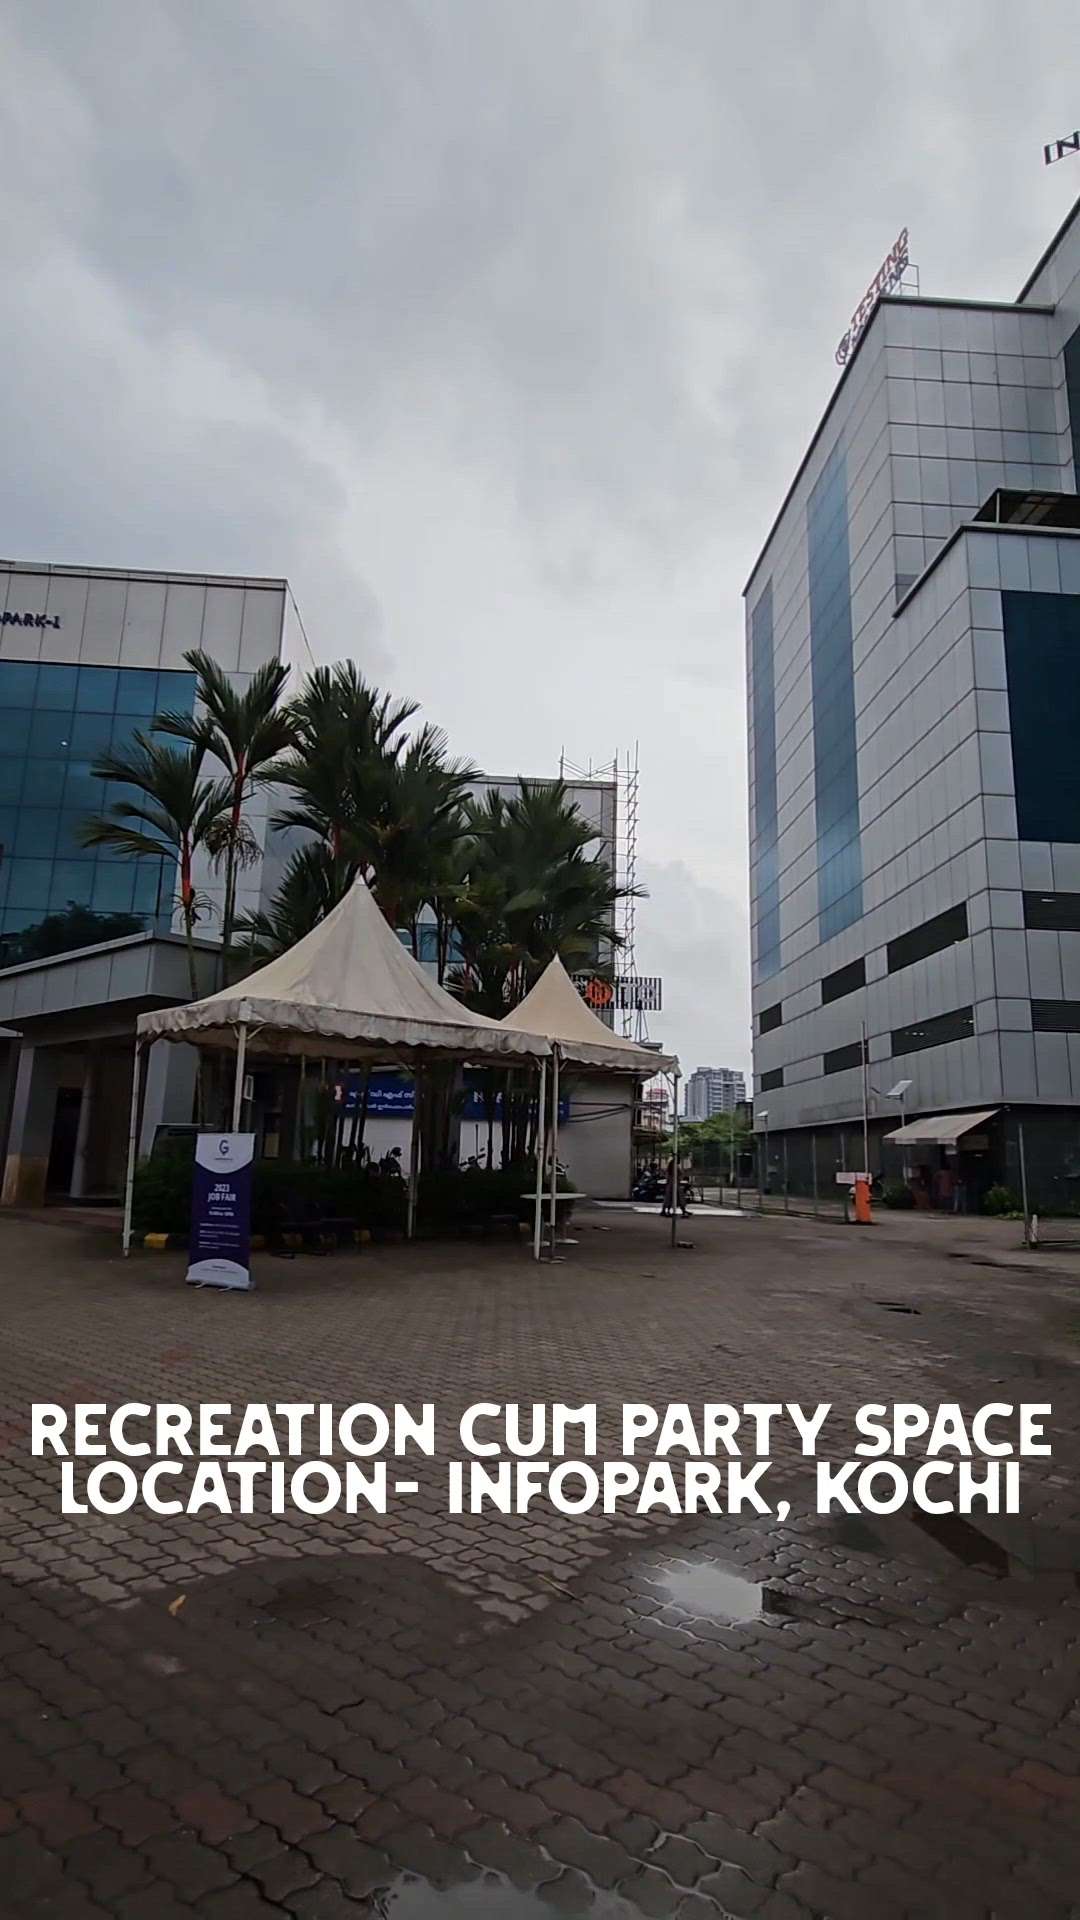 ONGOING SITE
PROJECT - RECREATION AREA FOR OFFICE 
LOCATION- INFOPARK, KOCHI
 #officeinteriors #woodentile #puffpanel #recreationalspaces #partyroom